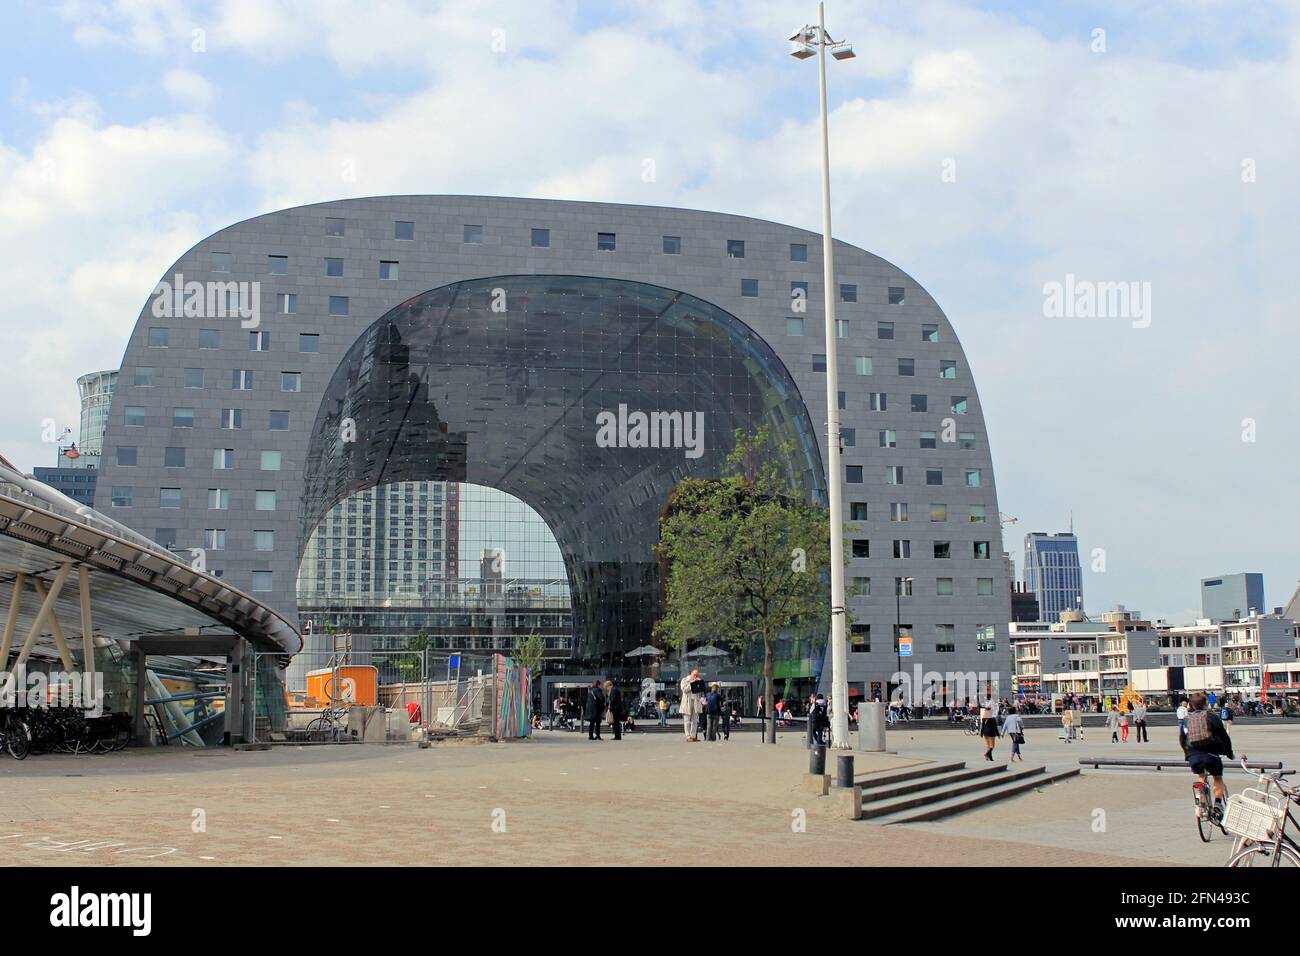 Rotterdam Market Hall. Facade of the famous curved palace with strolling tourists. Stock Photo